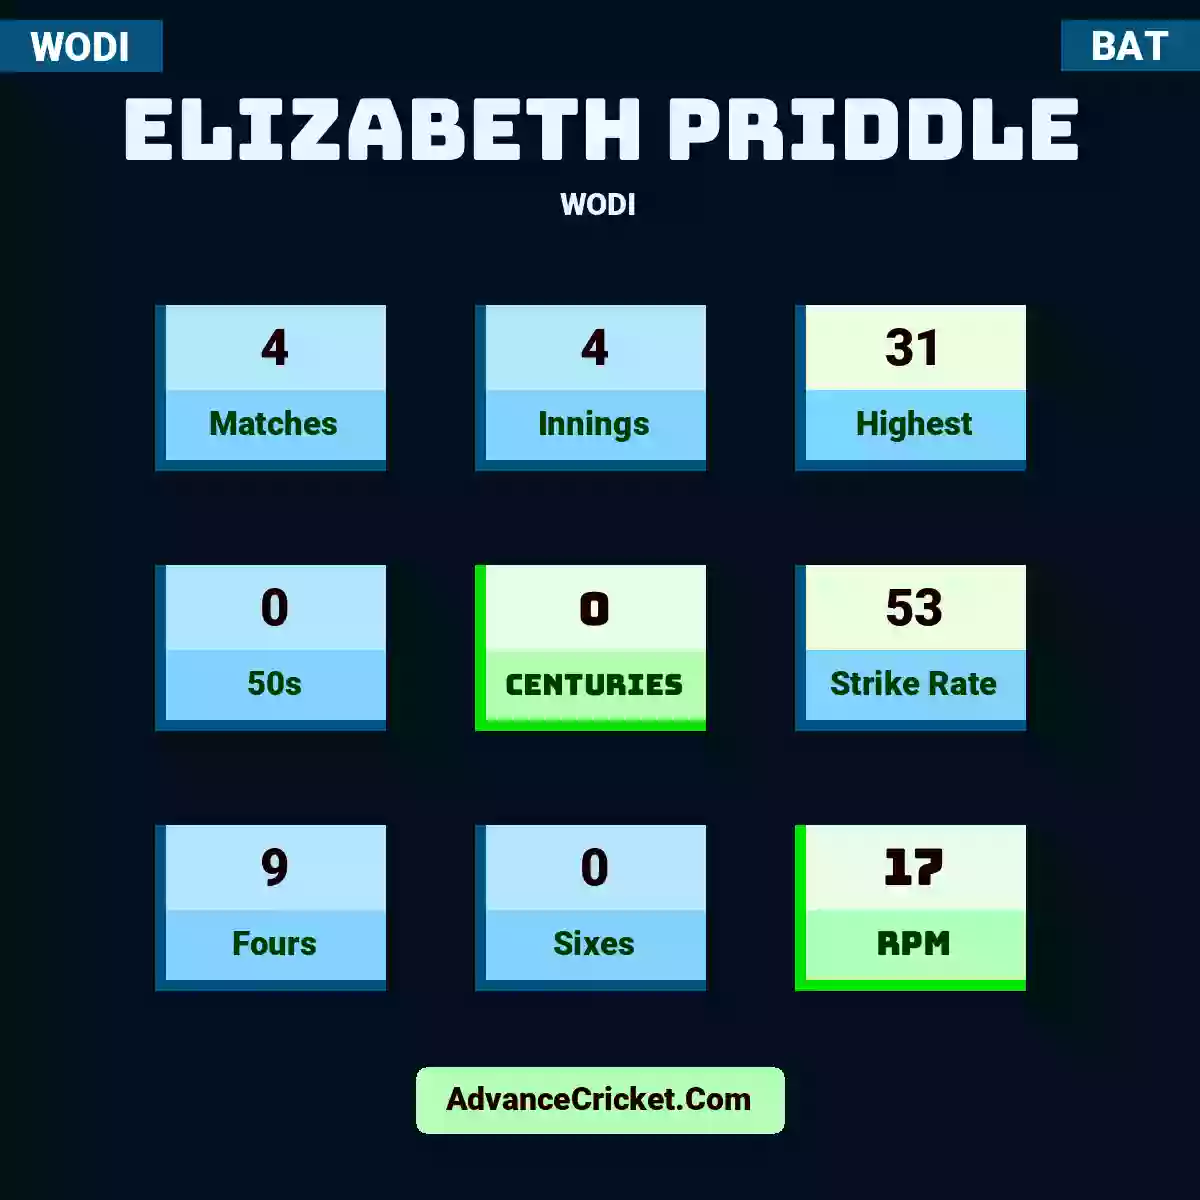 Elizabeth Priddle WODI , Elizabeth Priddle played 4 matches, scored 31 runs as highest, 0 half-centuries, and 0 centuries, with a strike rate of 53. E.Priddle hit 9 fours and 0 sixes, with an RPM of 17.